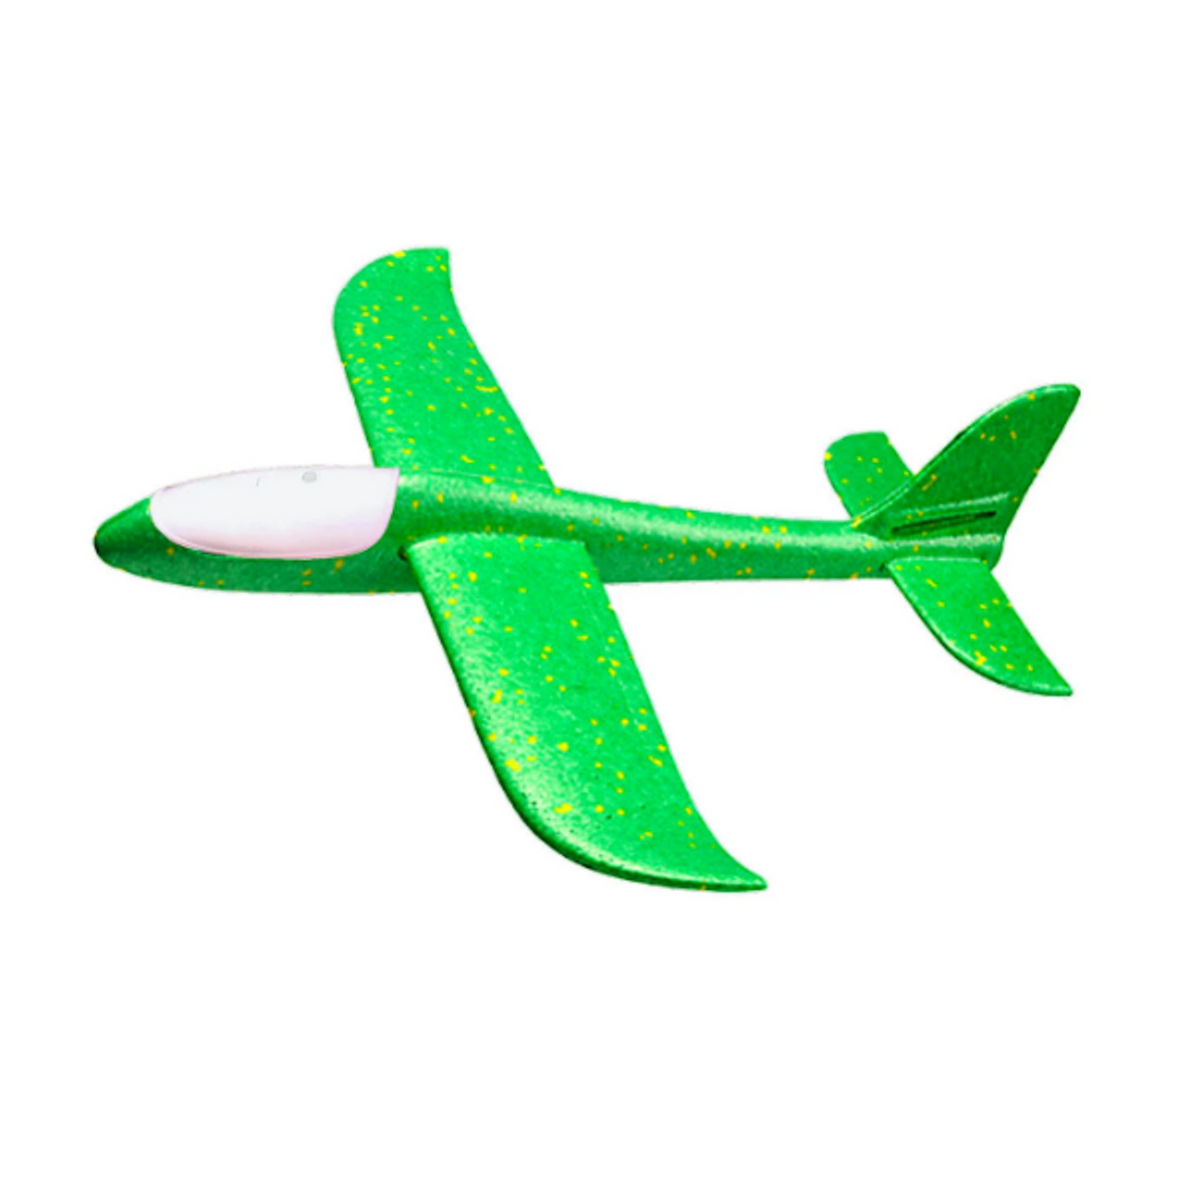 LED Sky Gliders-Vehicles &amp; Transportation-Spin Copter-Yellow Springs Toy Company